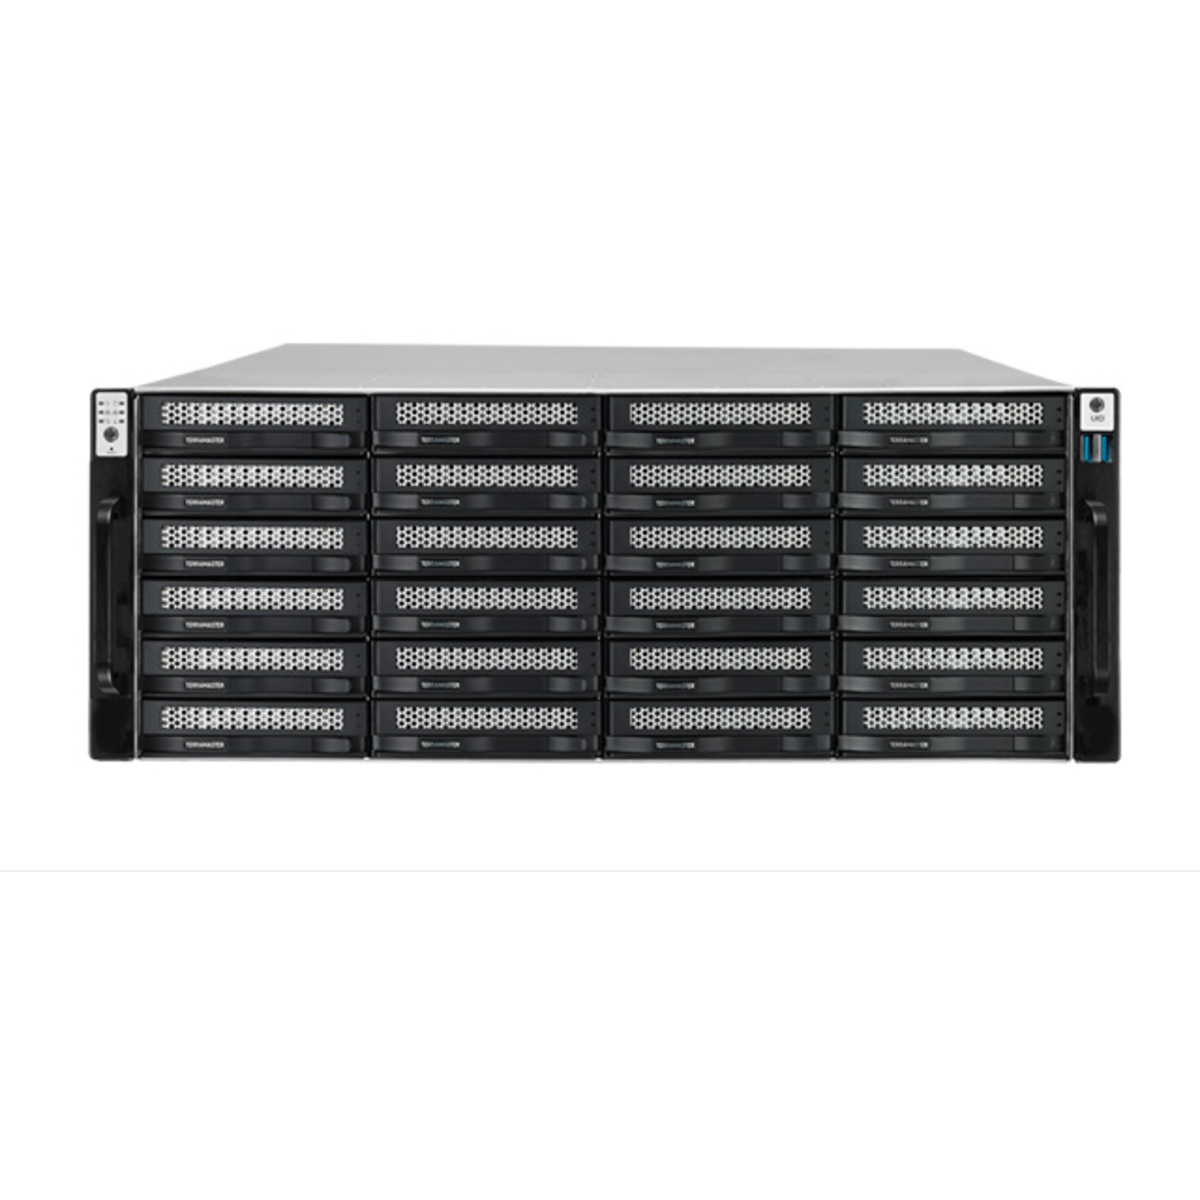 TerraMaster U24-722-2224 38tb 24-Bay RackMount Large Business / Enterprise NAS - Network Attached Storage Device 19x2tb Crucial MX500 CT2000MX500SSD1 2.5 560/510MB/s SATA 6Gb/s SSD CONSUMER Class Drives Installed - Burn-In Tested U24-722-2224